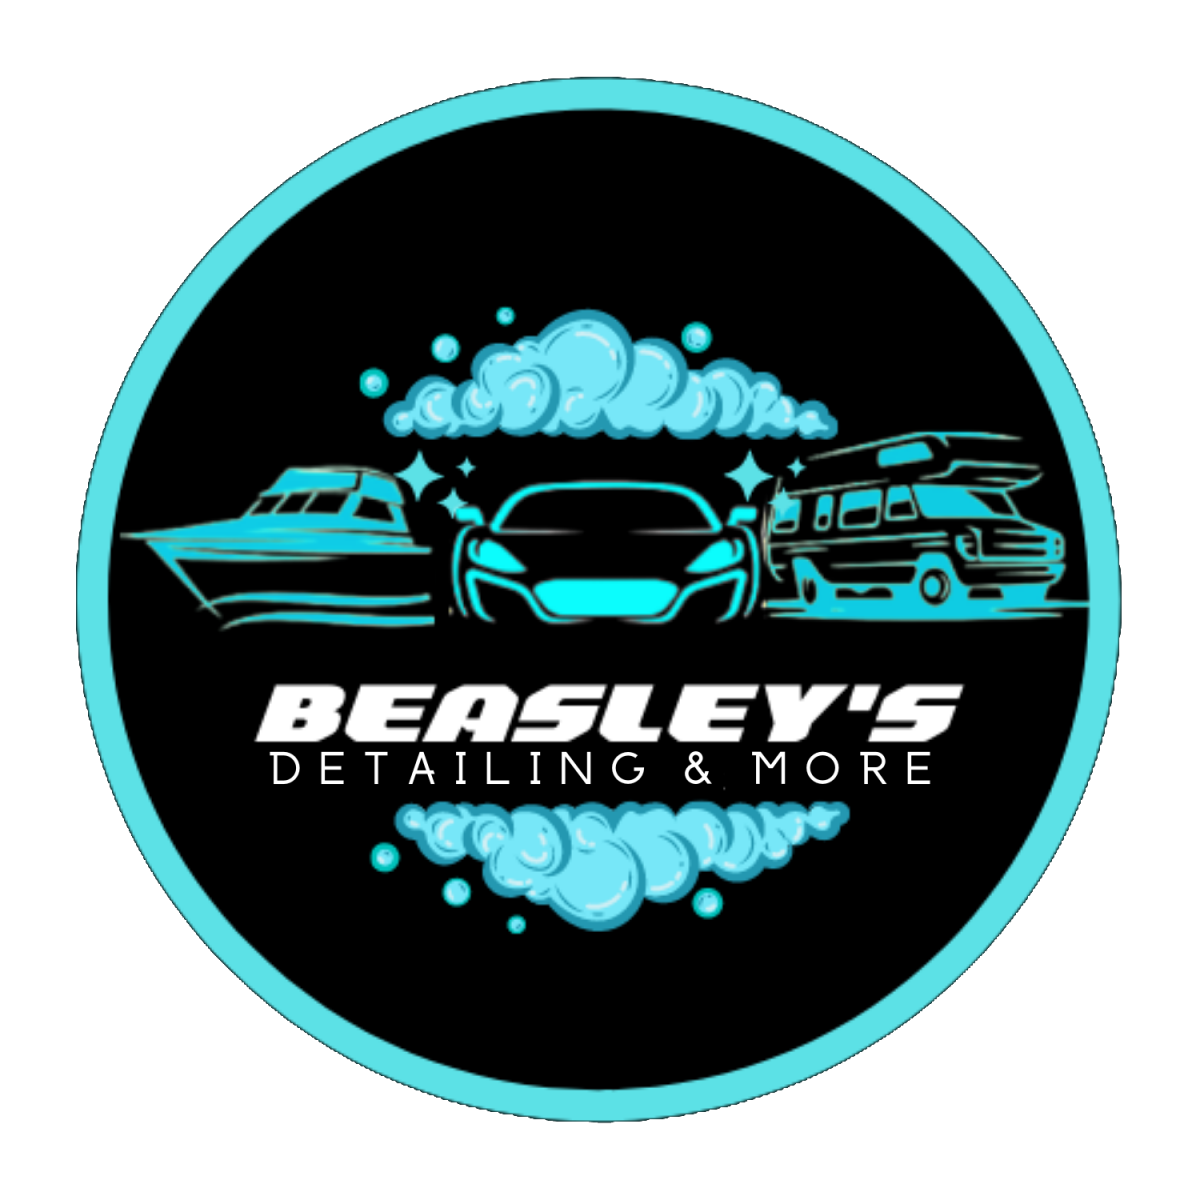 Beasley's Detailing and More